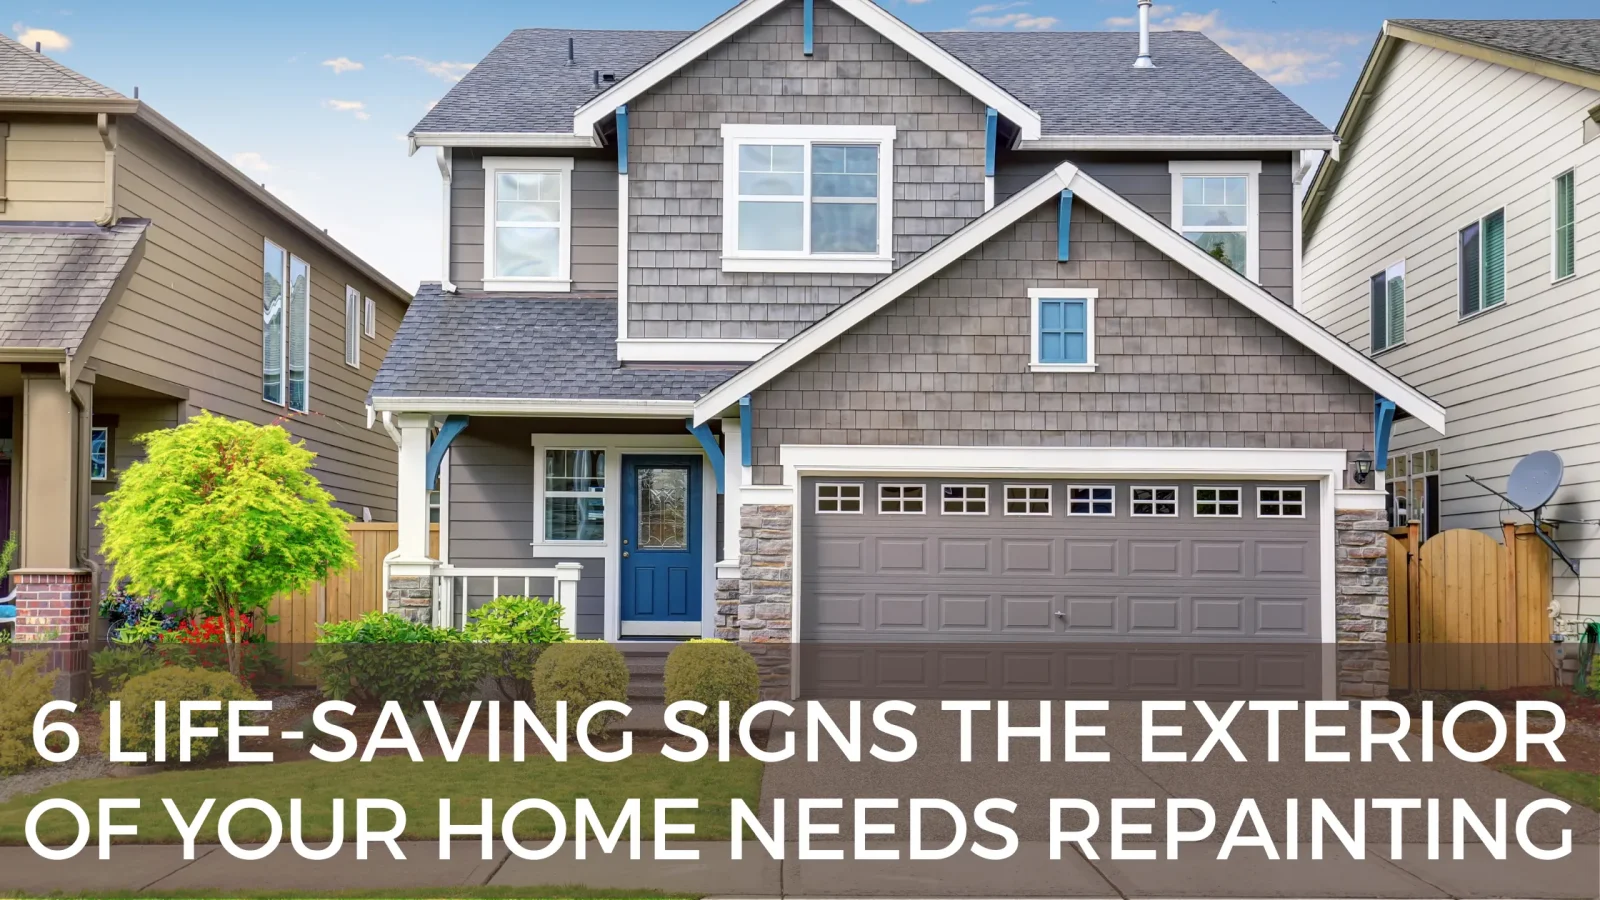 6 Life-Saving Signs The Exterior Of Your Home Needs Repainting